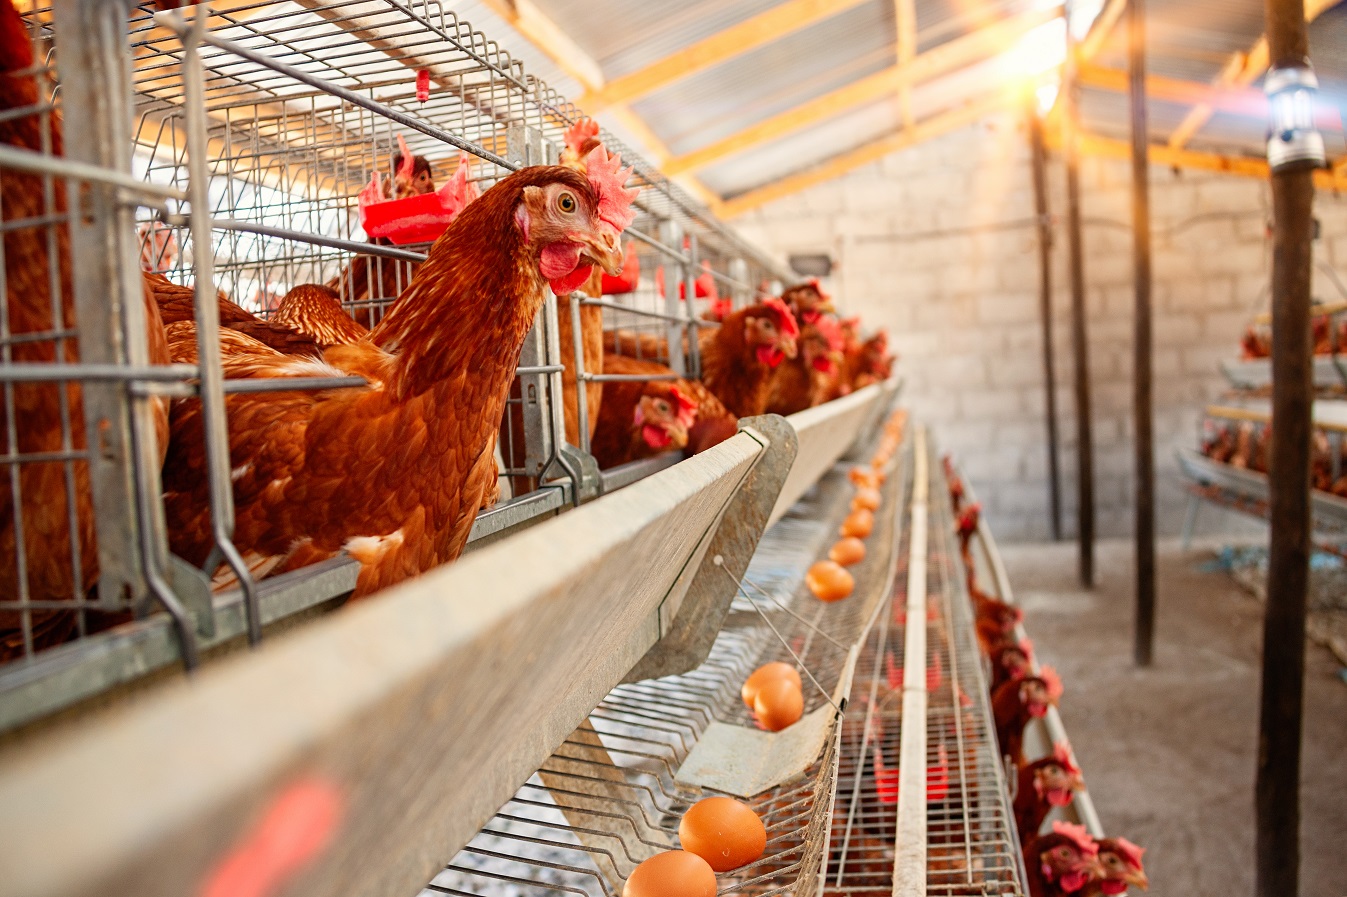 Poultry health, environment and equipment of poultry farms